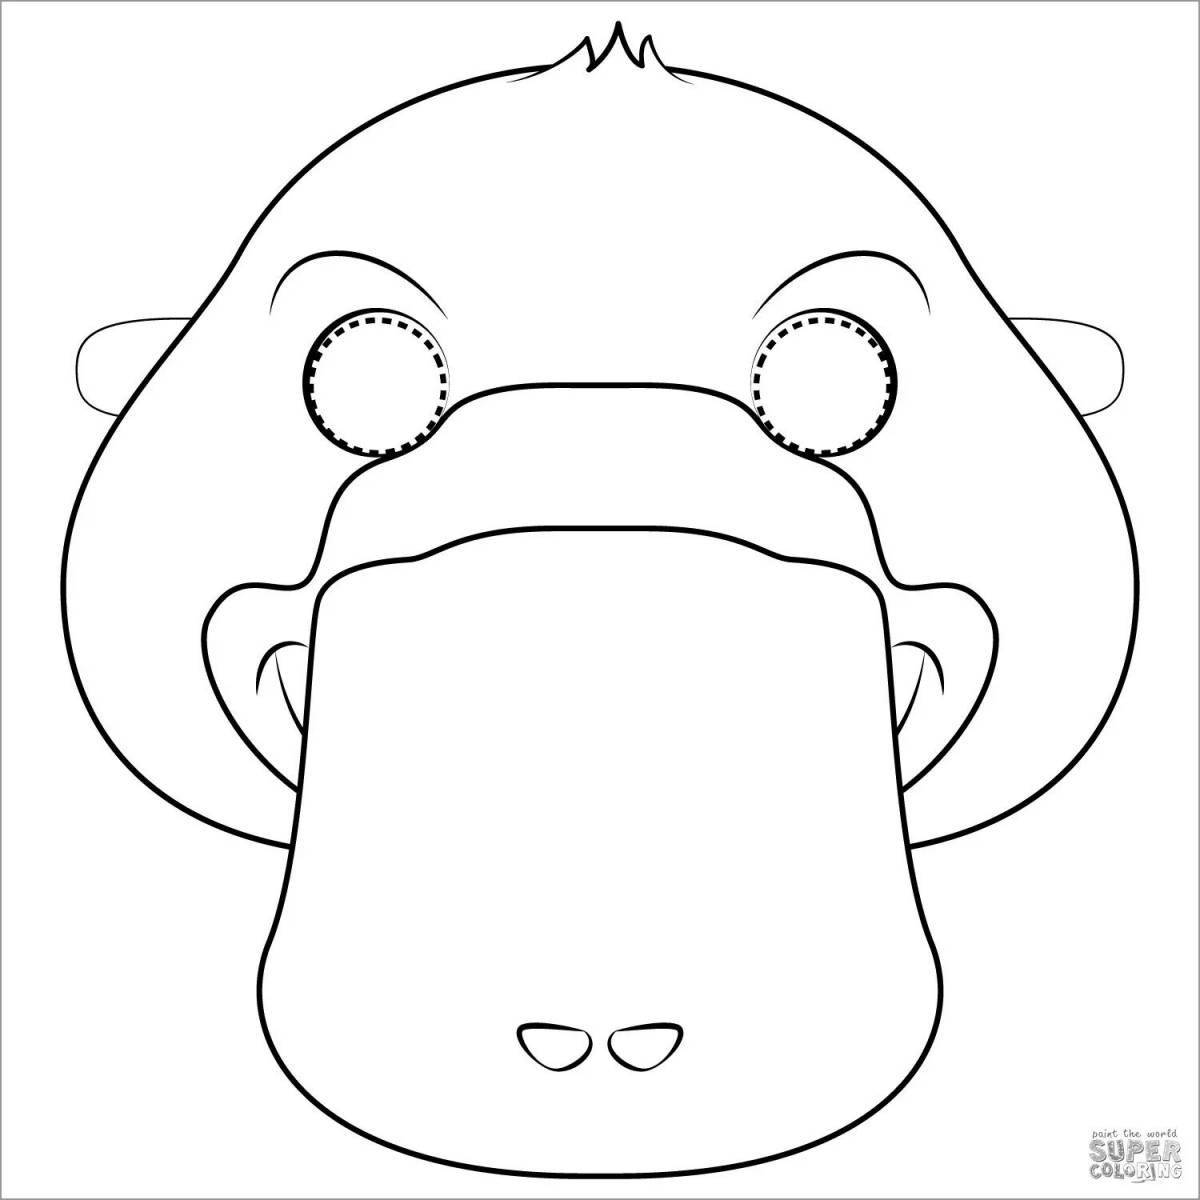 Adorable raptor mask coloring page